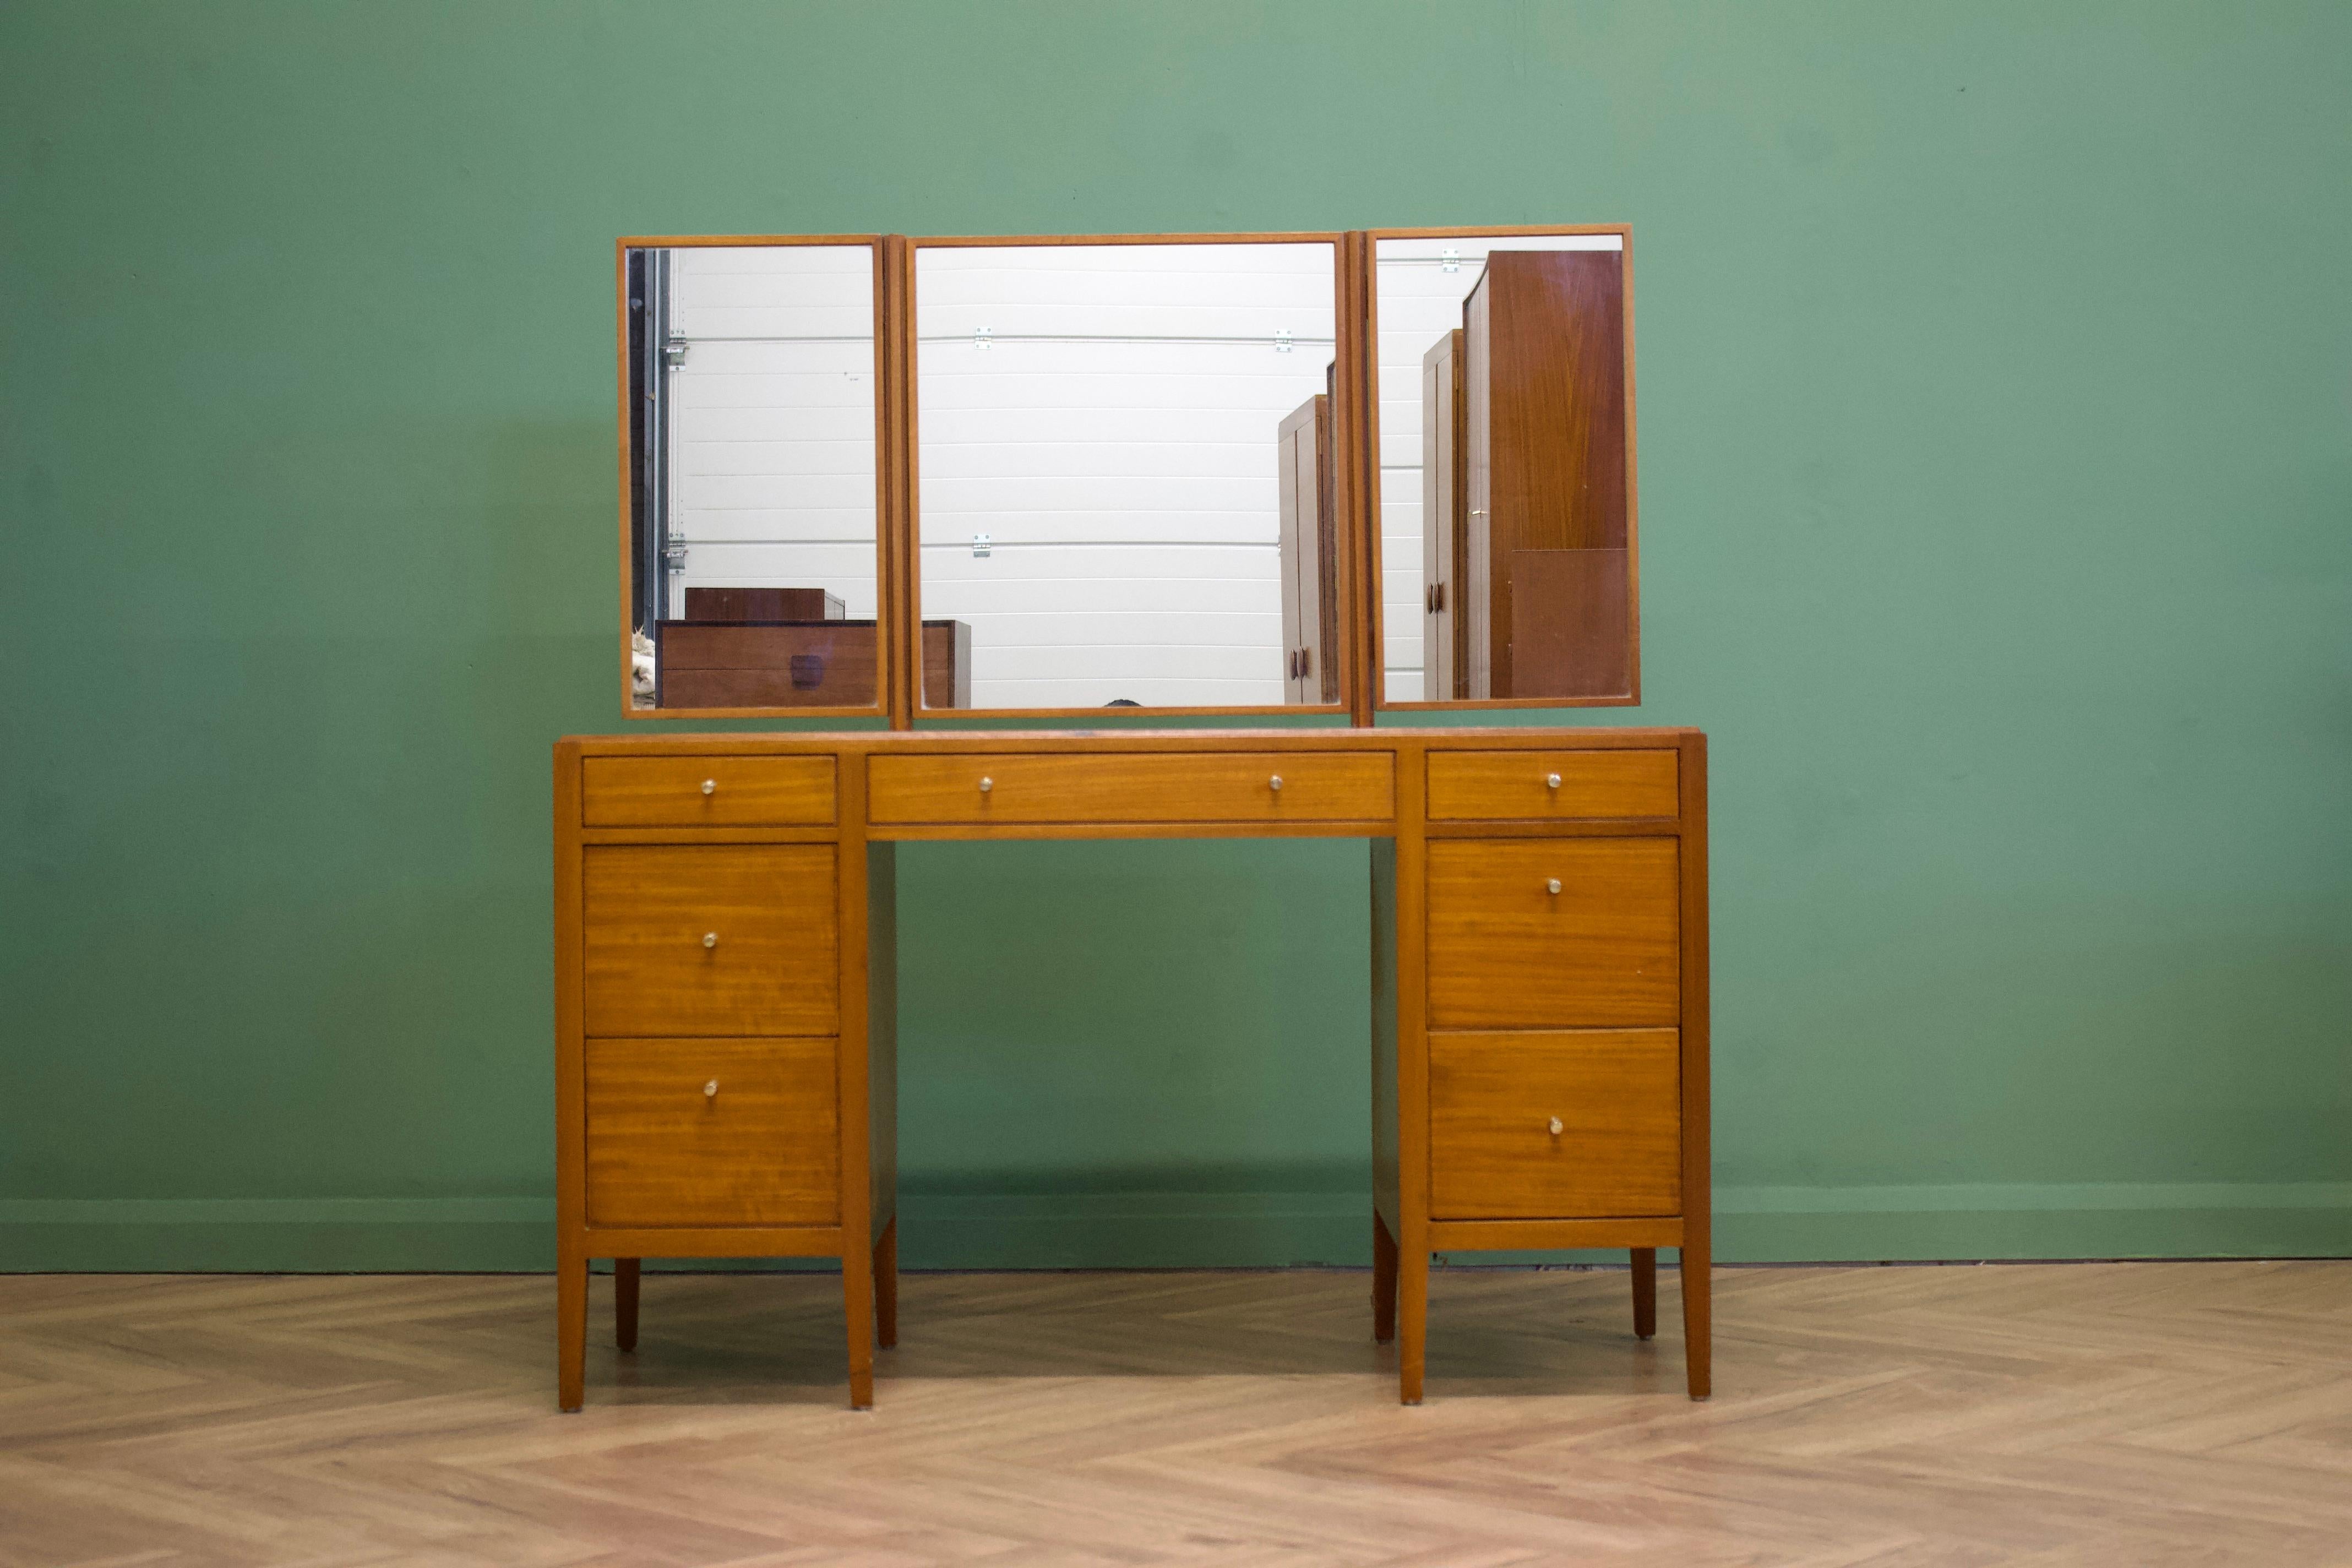 - Mid-century dressing table.
- Manufactured in the UK by Loughborough
- Retailed through the department store Heals, during the 1960s
- Made from Teak & Teak Veneer.

- Featuring 7 drawers and a triptych mirror.